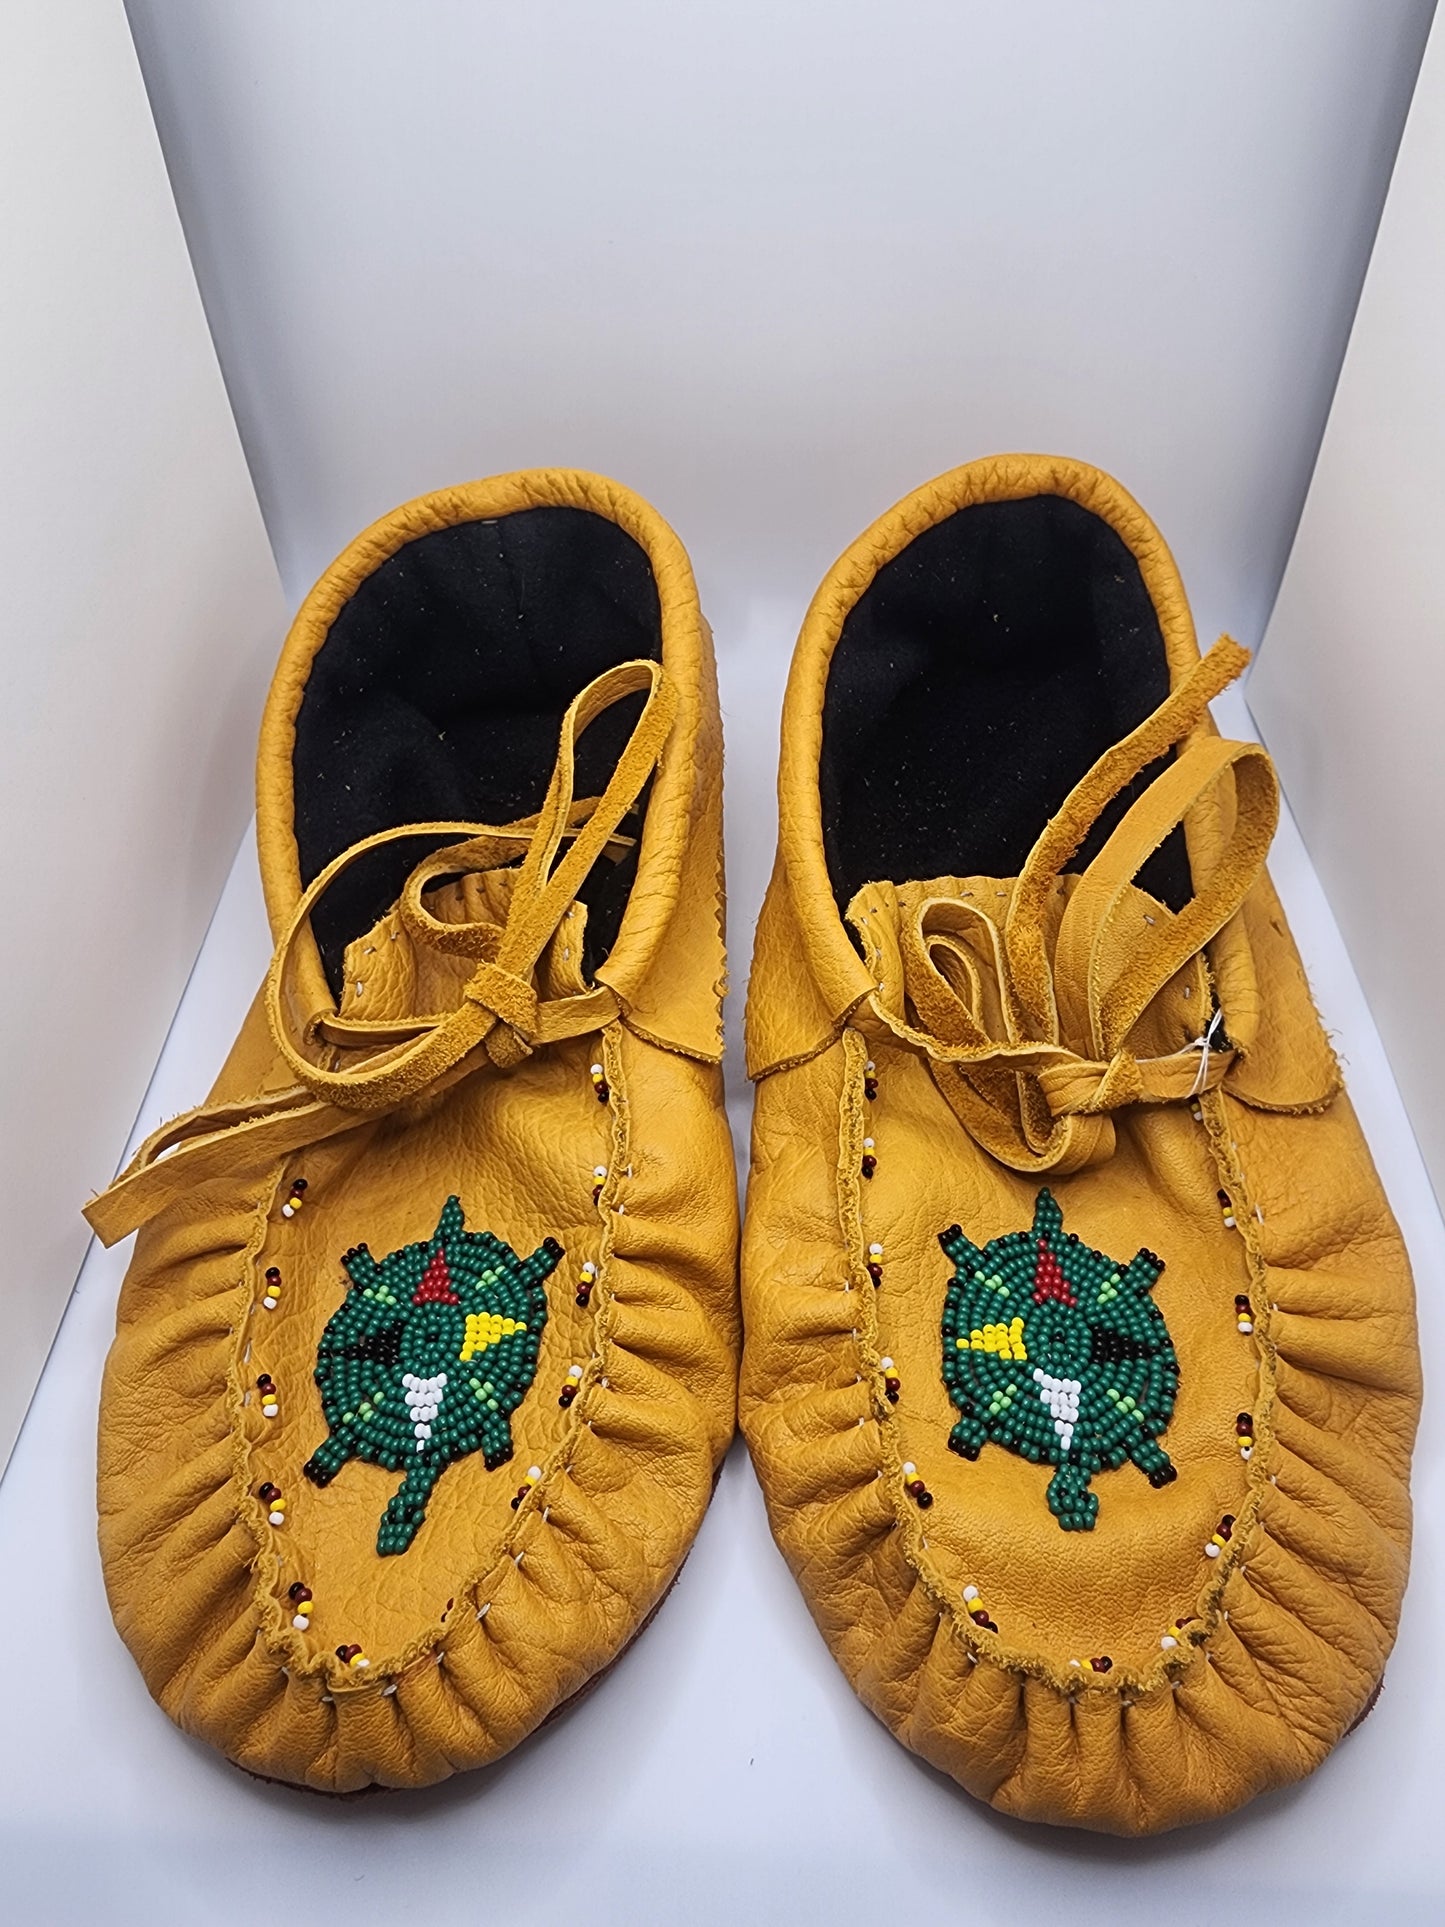 Leather Moccasins - Size 9(U.S) - with Beaded Turtle Design